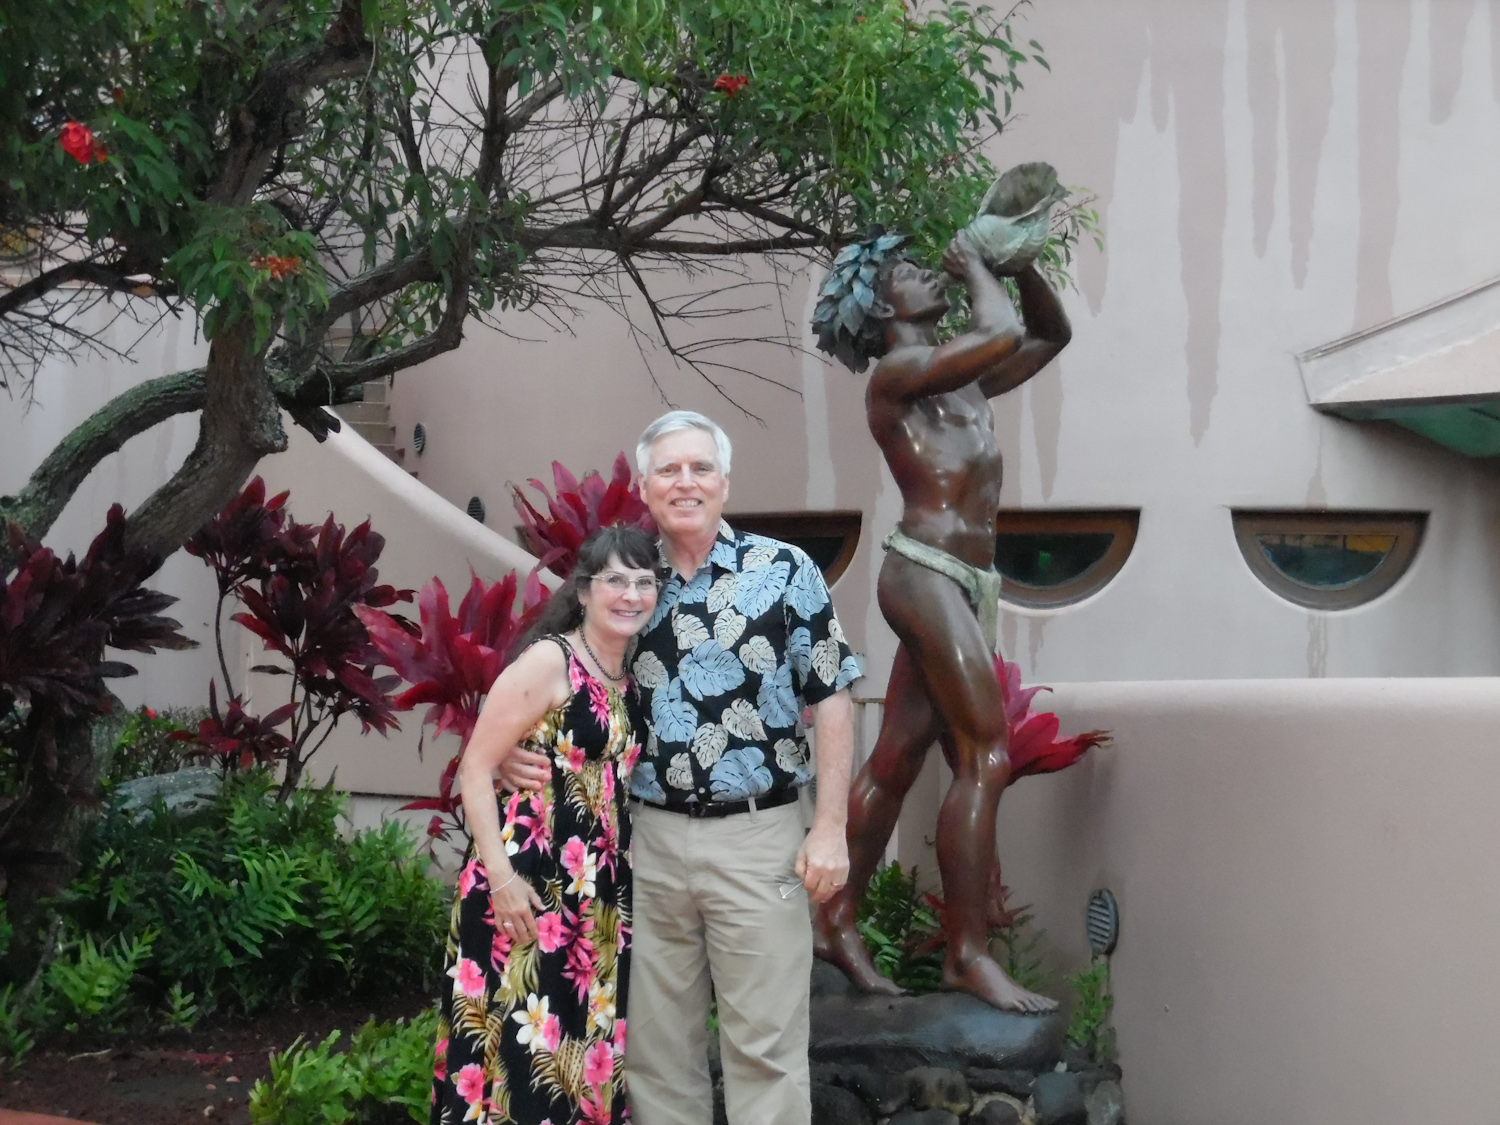 In front of the "Marilyn Monroe" house at the King Kamehameha Golf Club